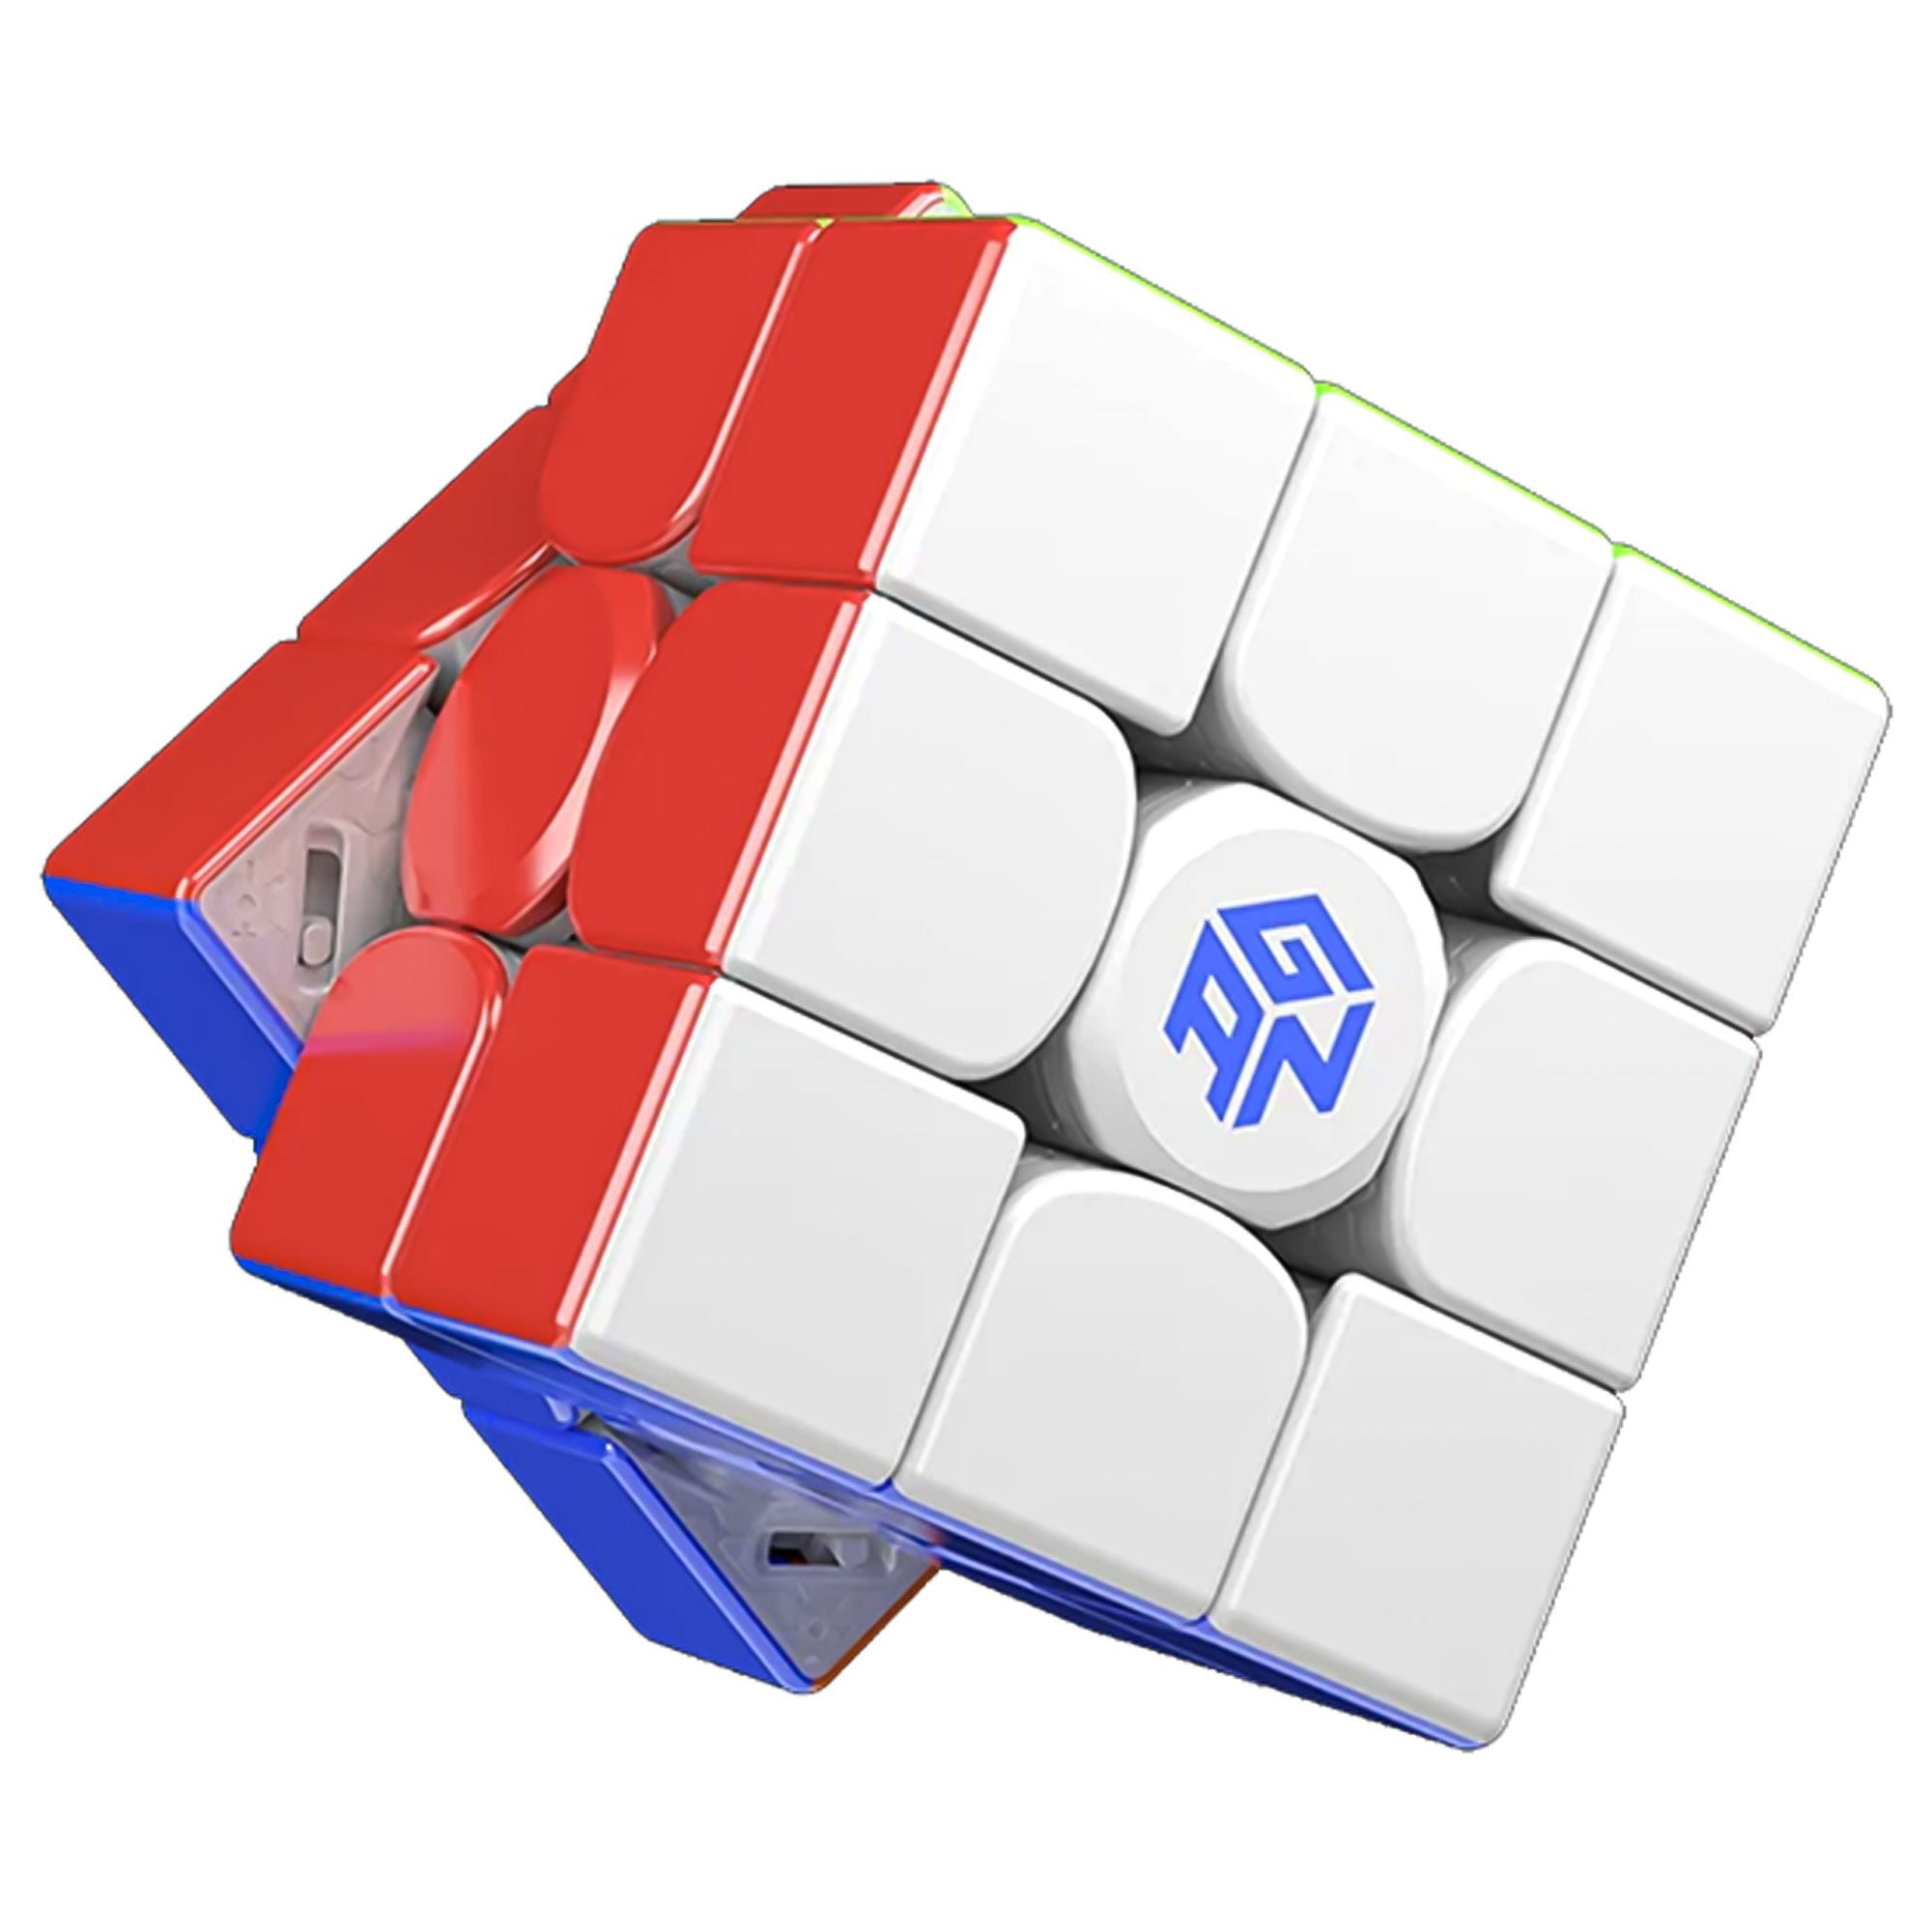 GAN 12 MagLev Frosted Cube 3x3x3 Magic Cube stickerless Puzzle